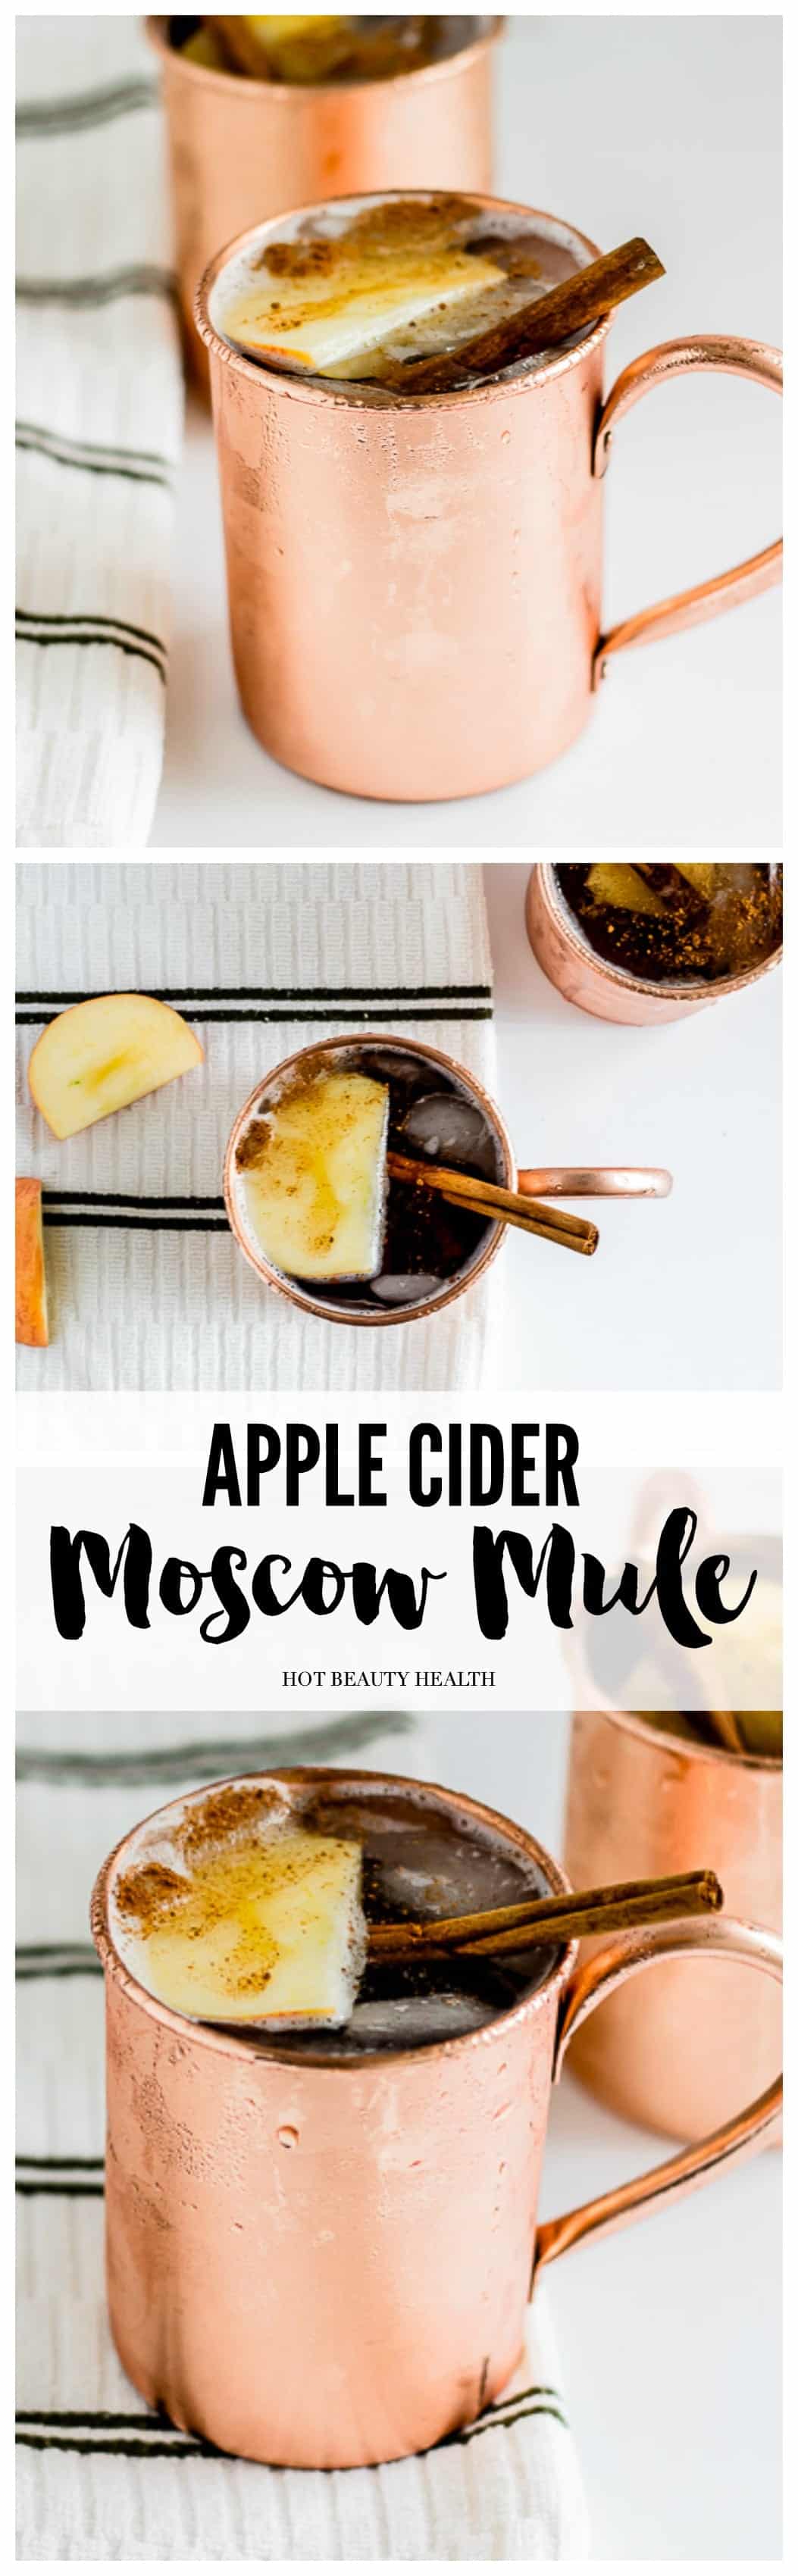 The addition of apple cider in the moscow mule pairs perfectly with the ginger beer while the cinnamon adds a lovely fall aroma and flavor to the drink. It's the perfect cocktail to serve guests this Thanksgiving and/or Christmas! (Click here for the moscow mule cocktail recipe!)